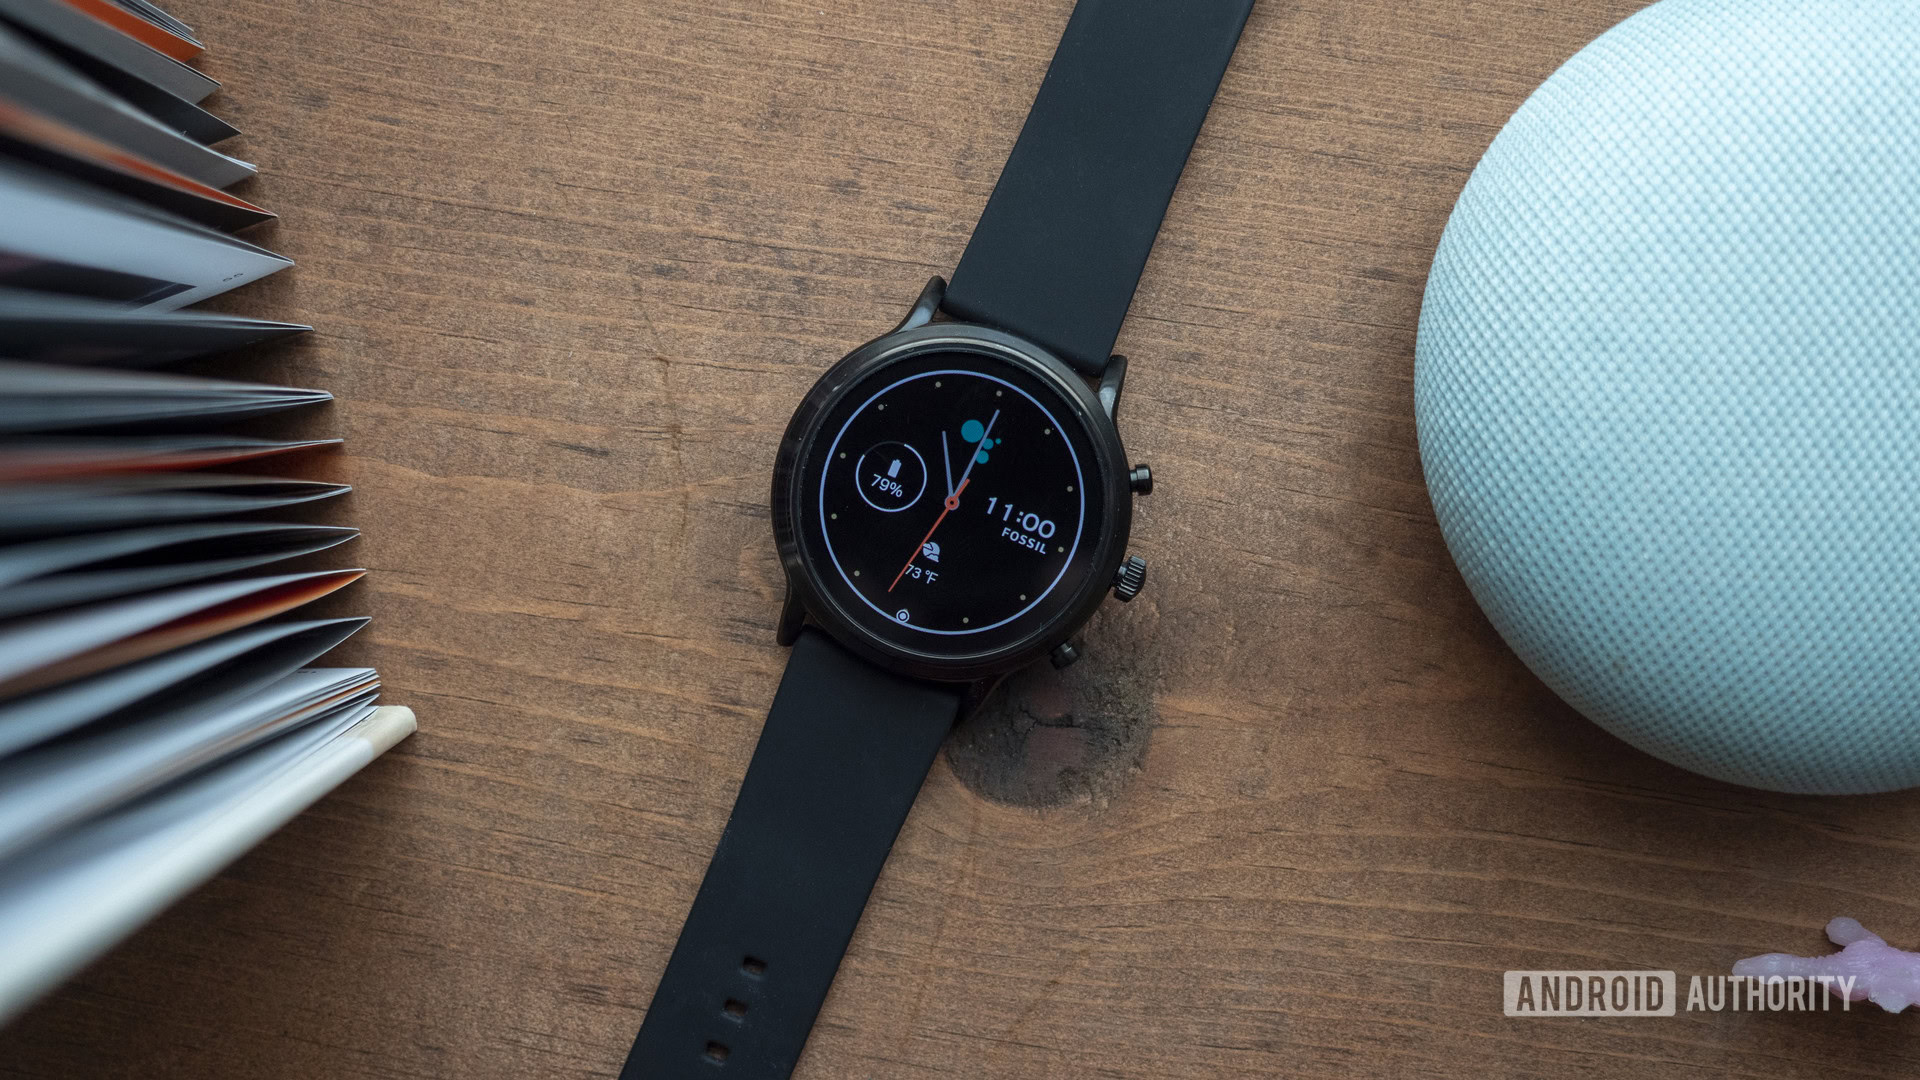 Fossil's new smartwatches add GPS, NFC, and heartbeat monitors